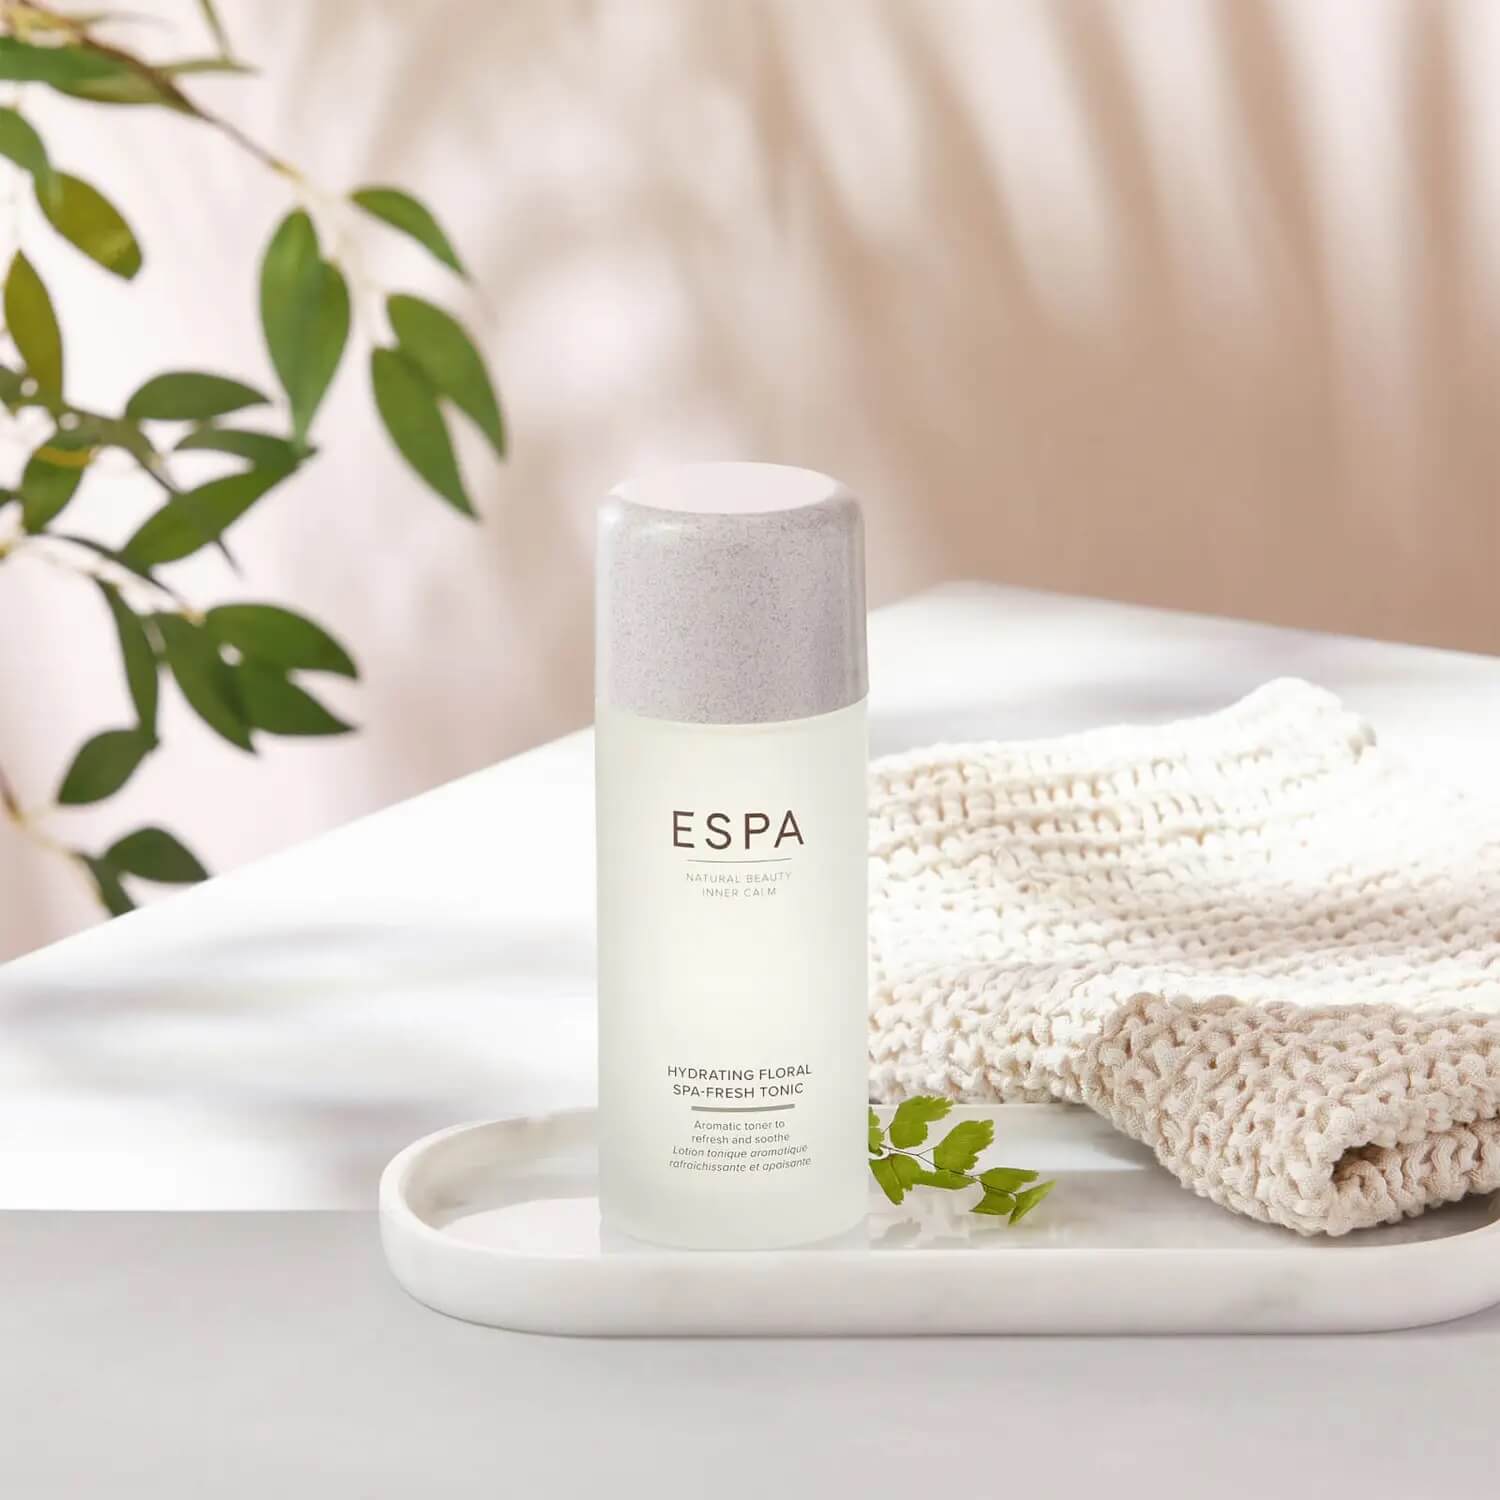 A glimpse of diverse products by ESPA, supporting the UK economy on YouK.